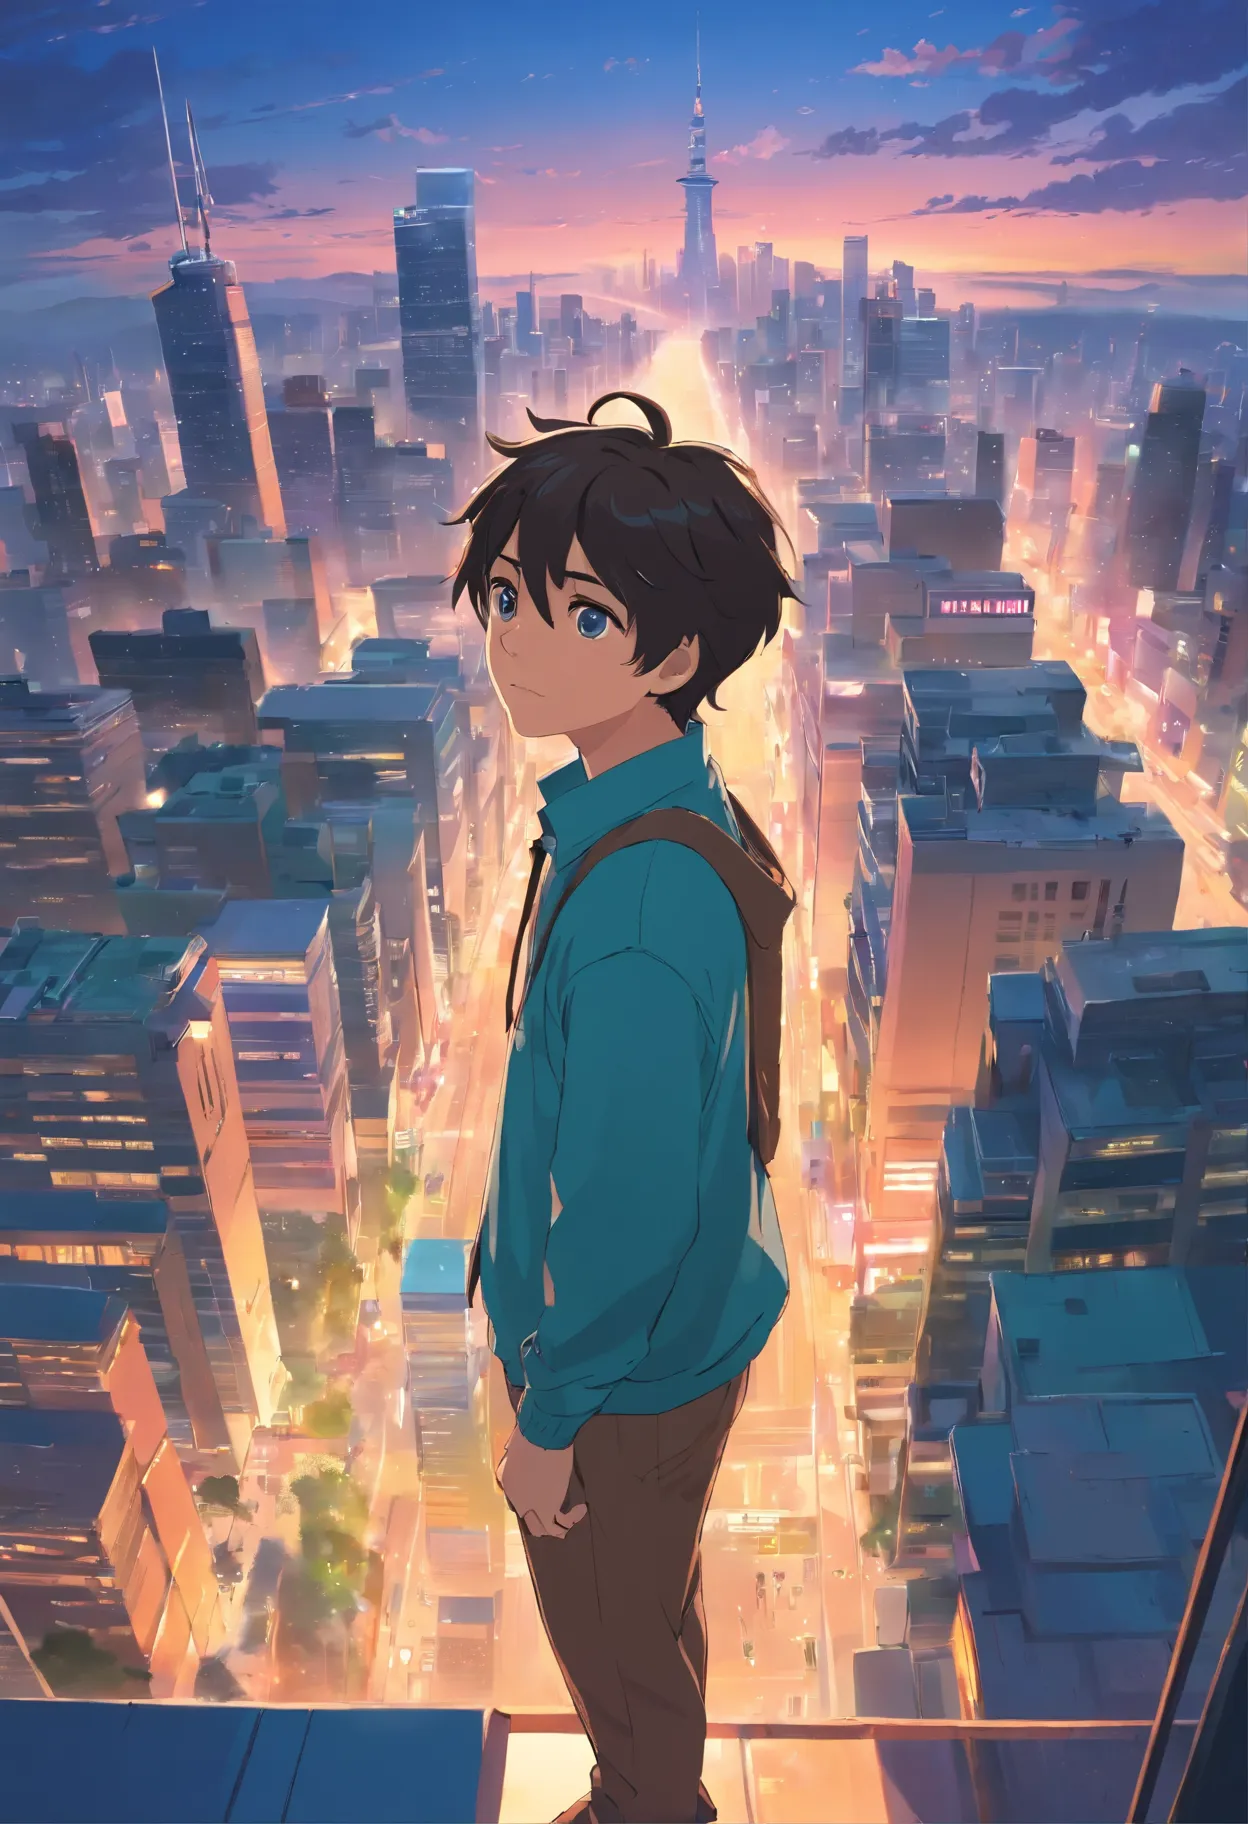 There is a 15 year old boy looking down on a modern city. Chic is a person from the past trapped in the future.